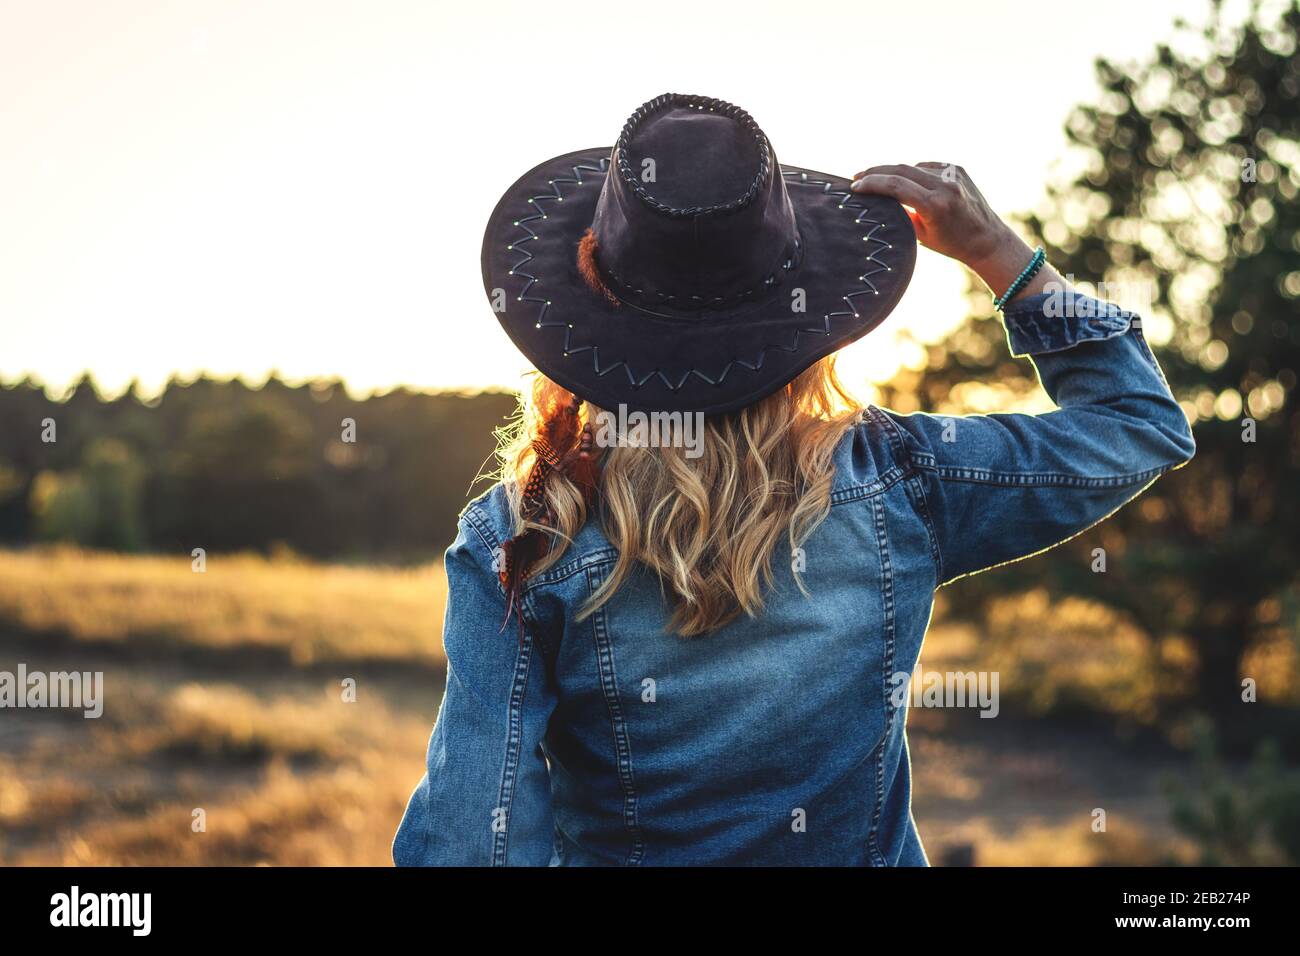 Blond hair woman with hat and denim jacket enjoying sunset outdoors. Fashion concept with woman wearing trendy casual clothing in nature at summer Stock Photo